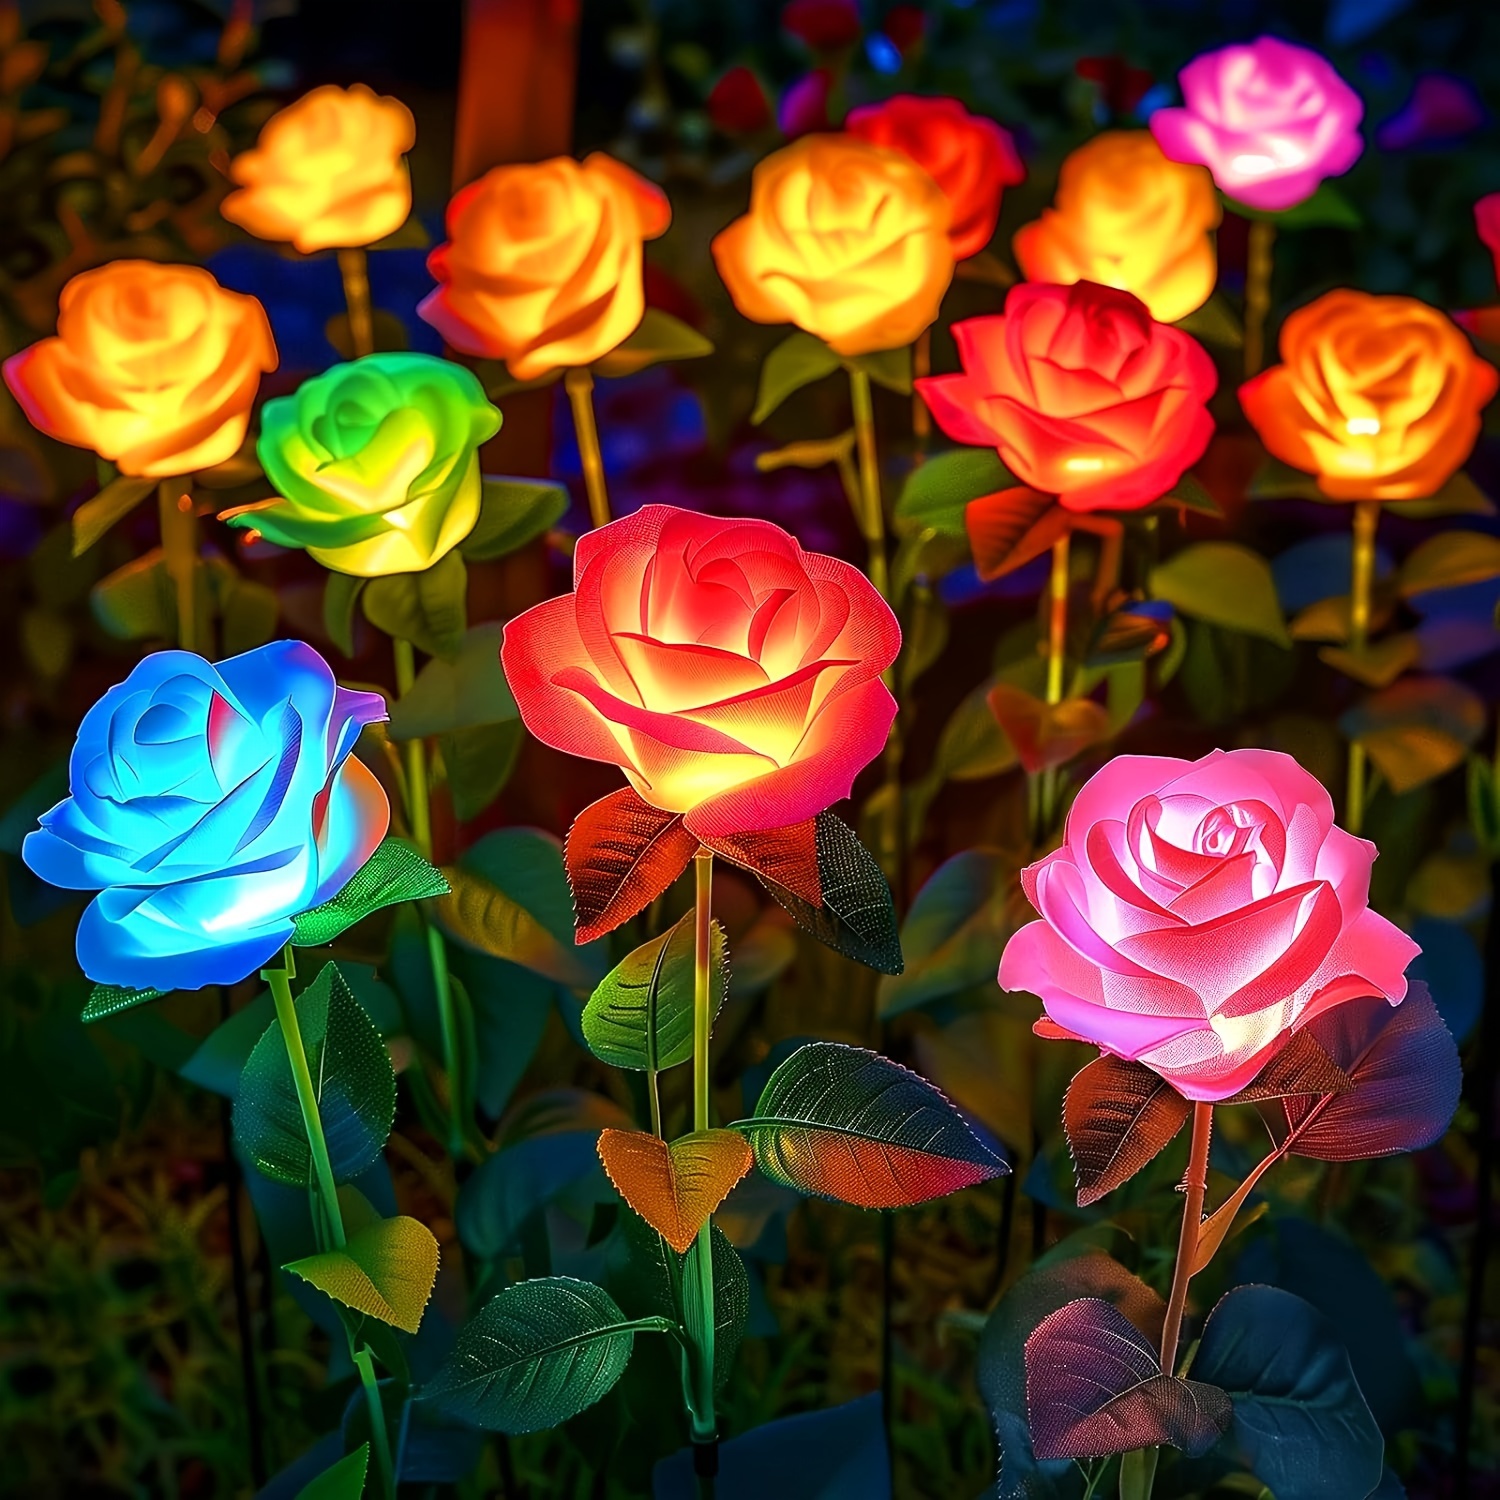 

4 Pack Garden Decor Solar Outdoor Lights Decorative, 7 Color Charging Garden Lights Solar Powered Solar Flowers With More Realistic Roses For Yard Decoration